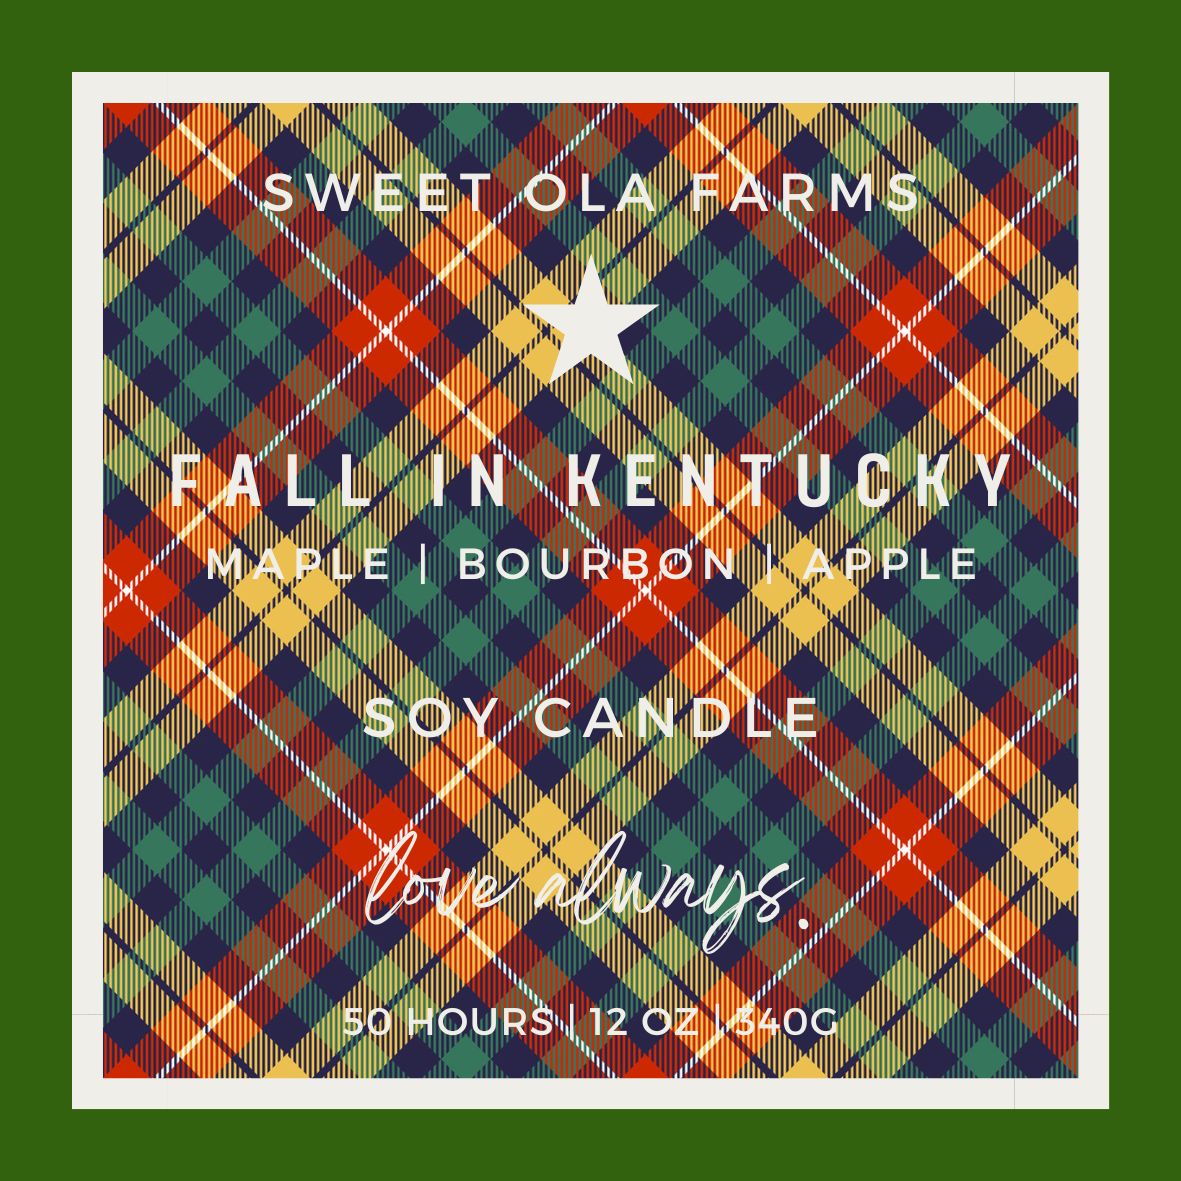 Fall in Kentucky - Hand Poured Soy Candle